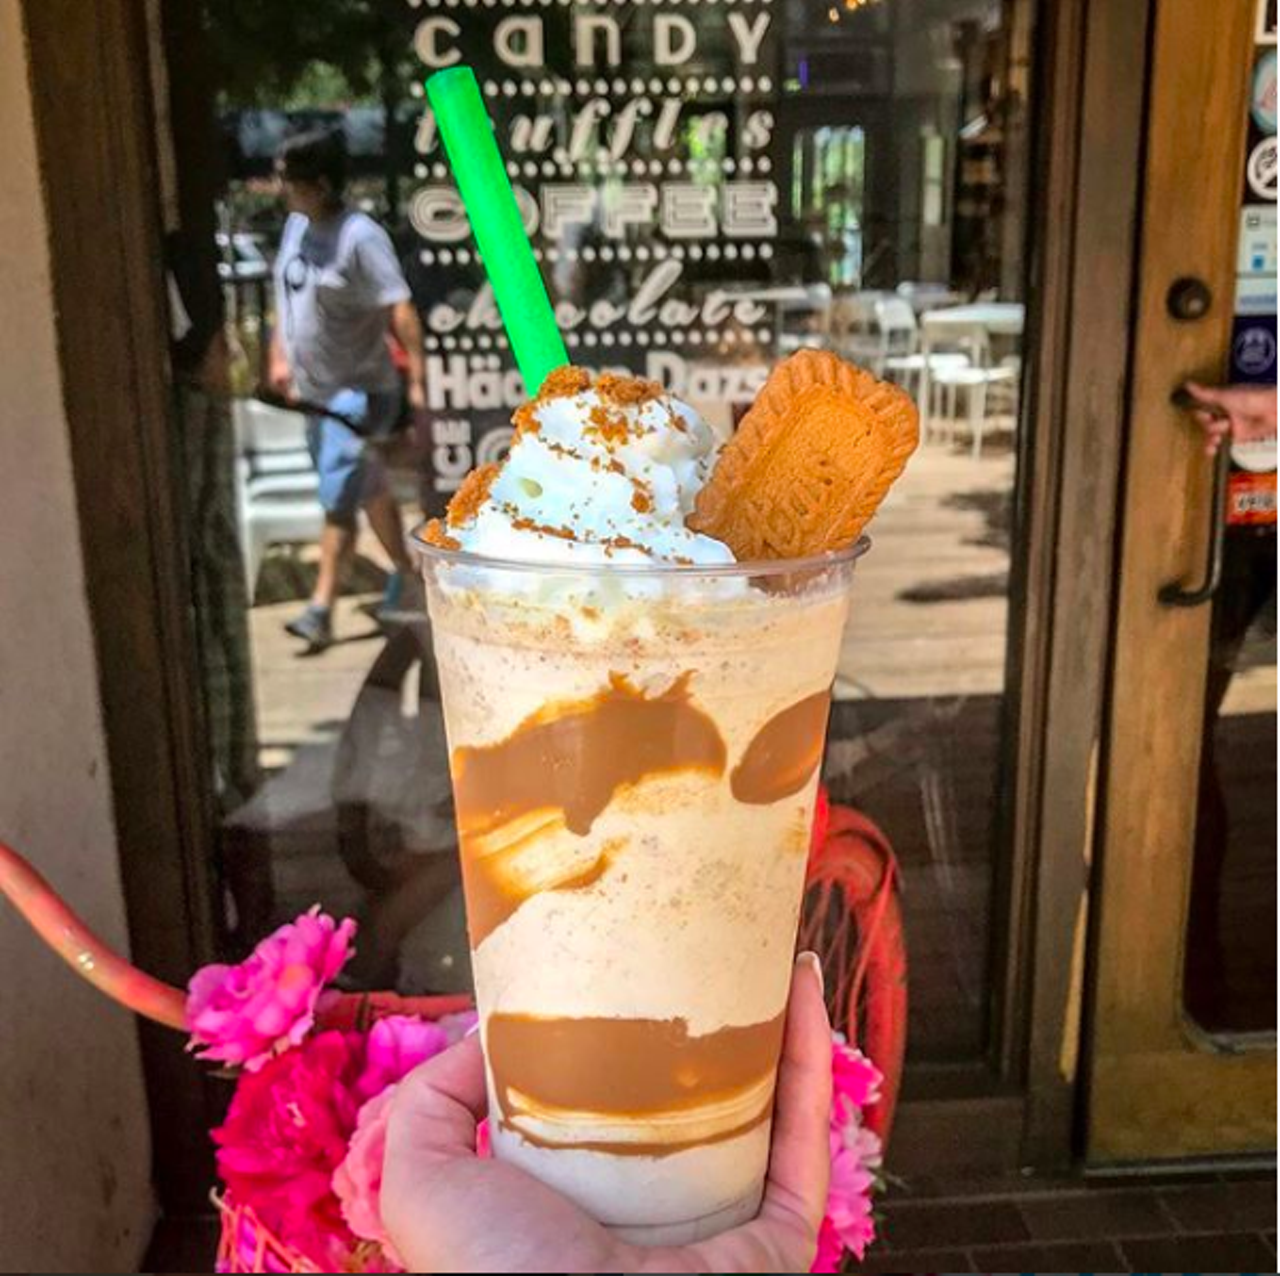 Chocollazo
4013 Broadway,  (210) 776-3963, chocollazo.com 
Broadway's own chocolate shop keeps San Antonio cool with over-the-top milkshakes. Ask for this secret menu item, the cookie butter milkshake, fi you've got a sweet tooth.  
Photo via Instagram / Chocollazo